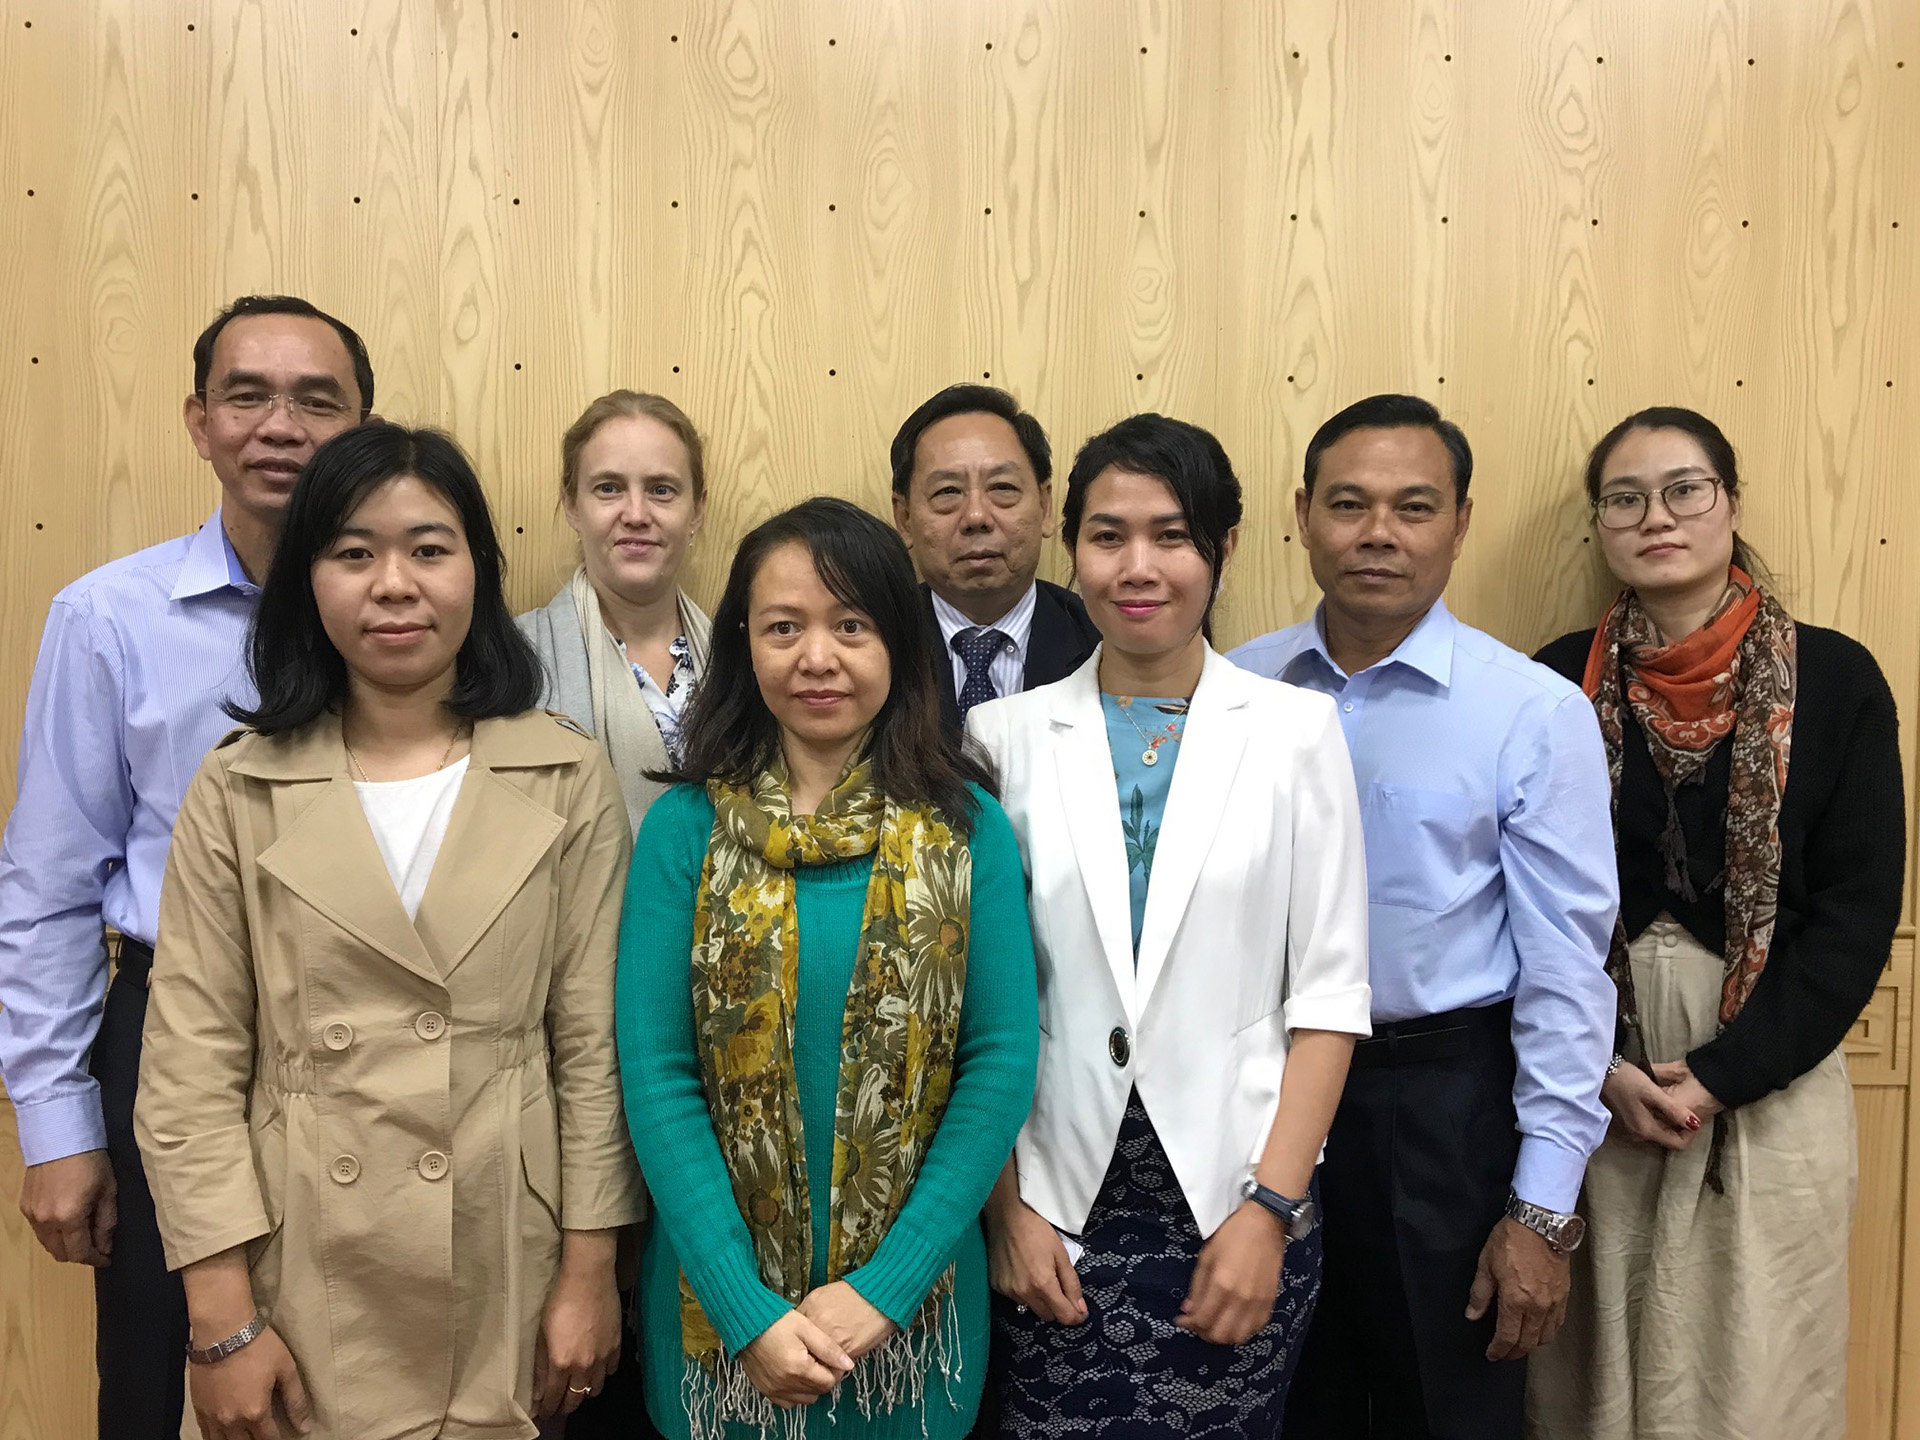 Participants from the "Sub-regional Exchange on Operationalizing SIS" in Hanoi, Viet Nam in December 2019